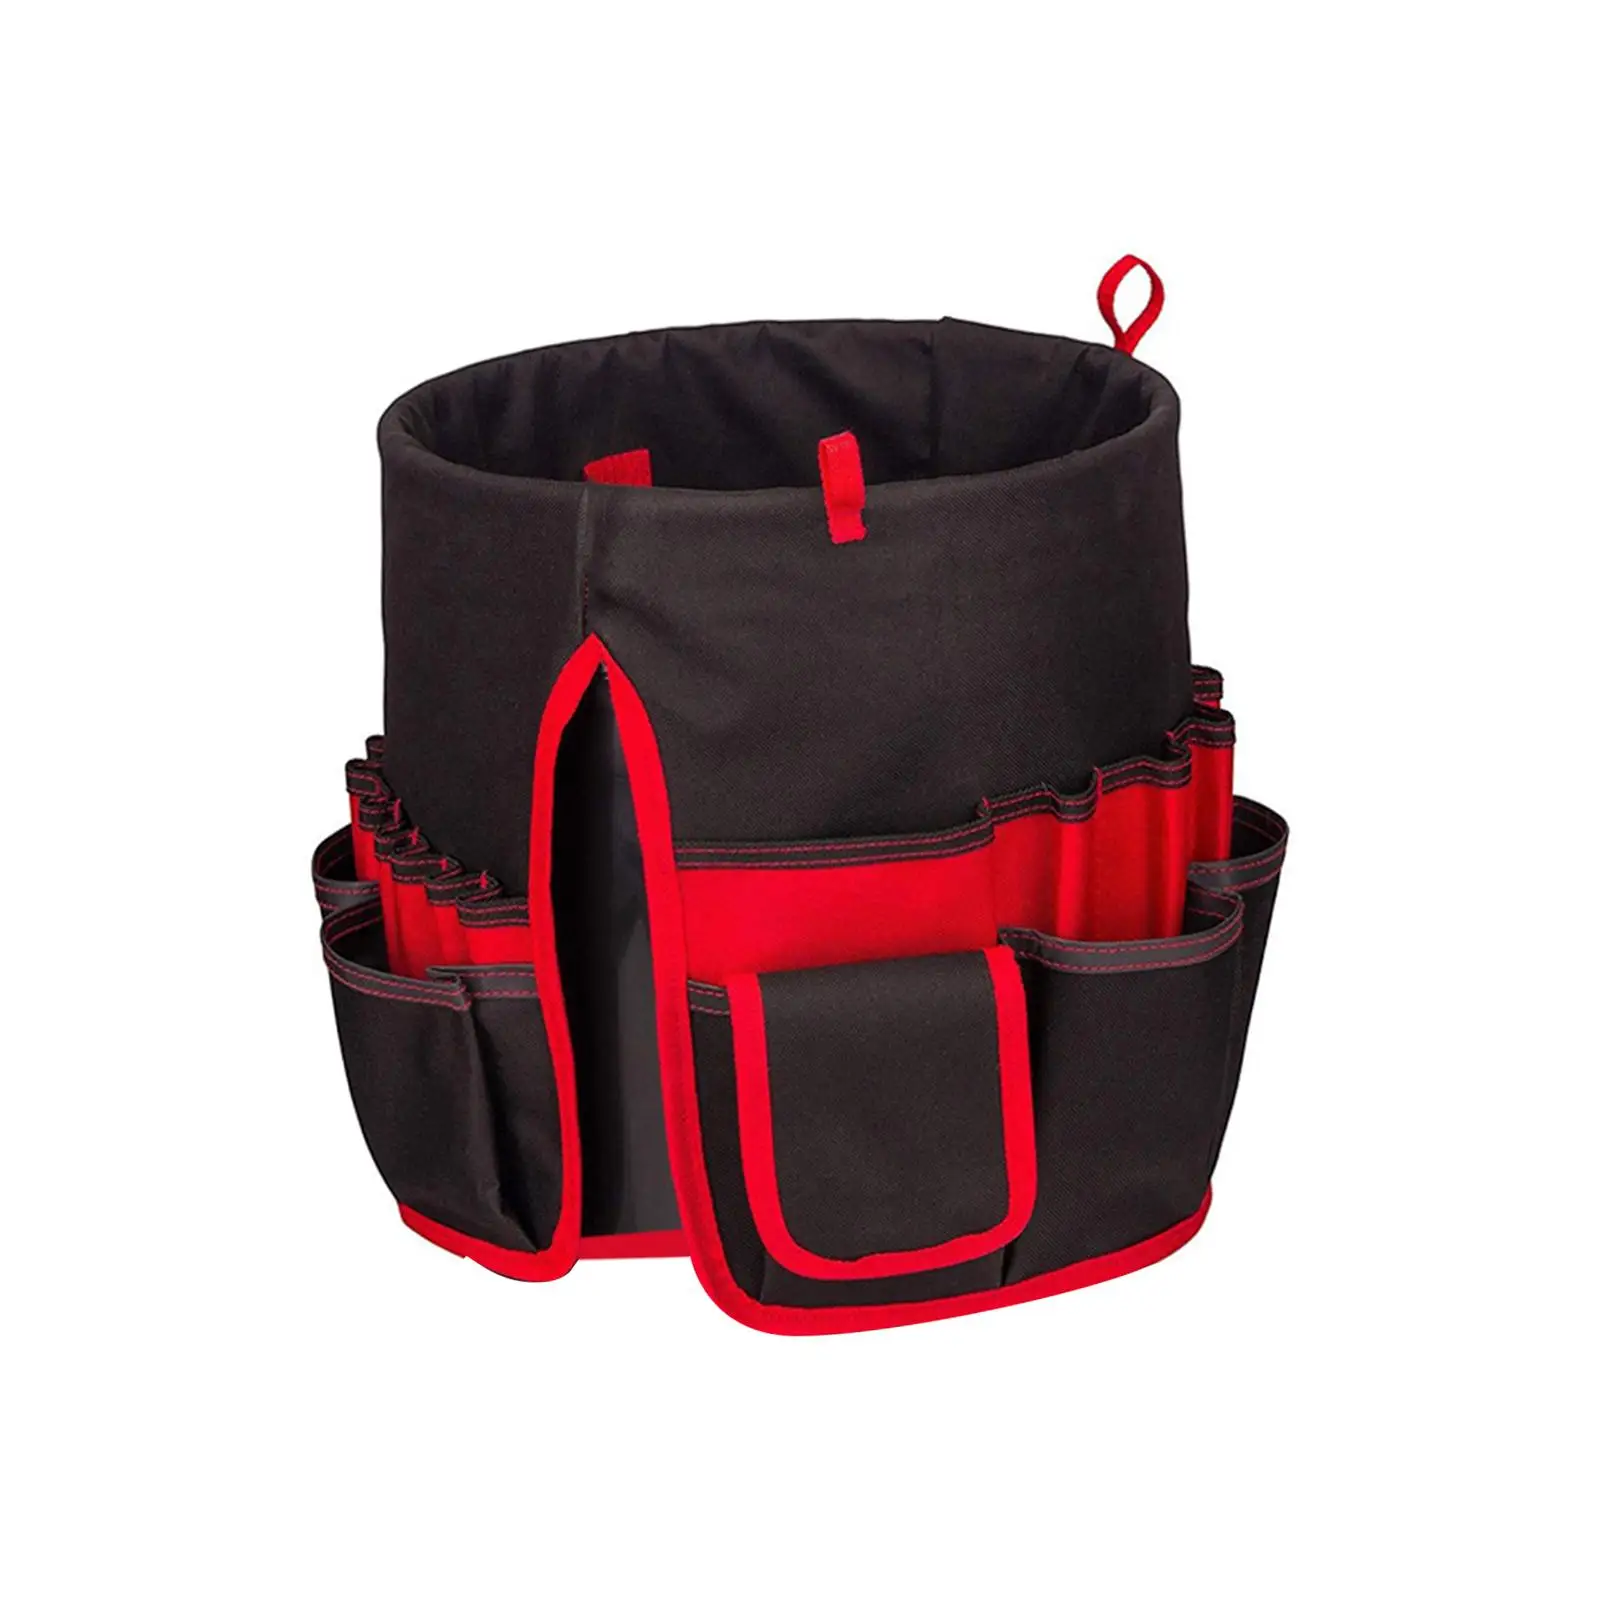 Garden Tools Bucket Bag Gardening Tool Pouch Home Organizer Wear Resistant Tool Storage Oxford Cloth Outside for Woodworking Bag